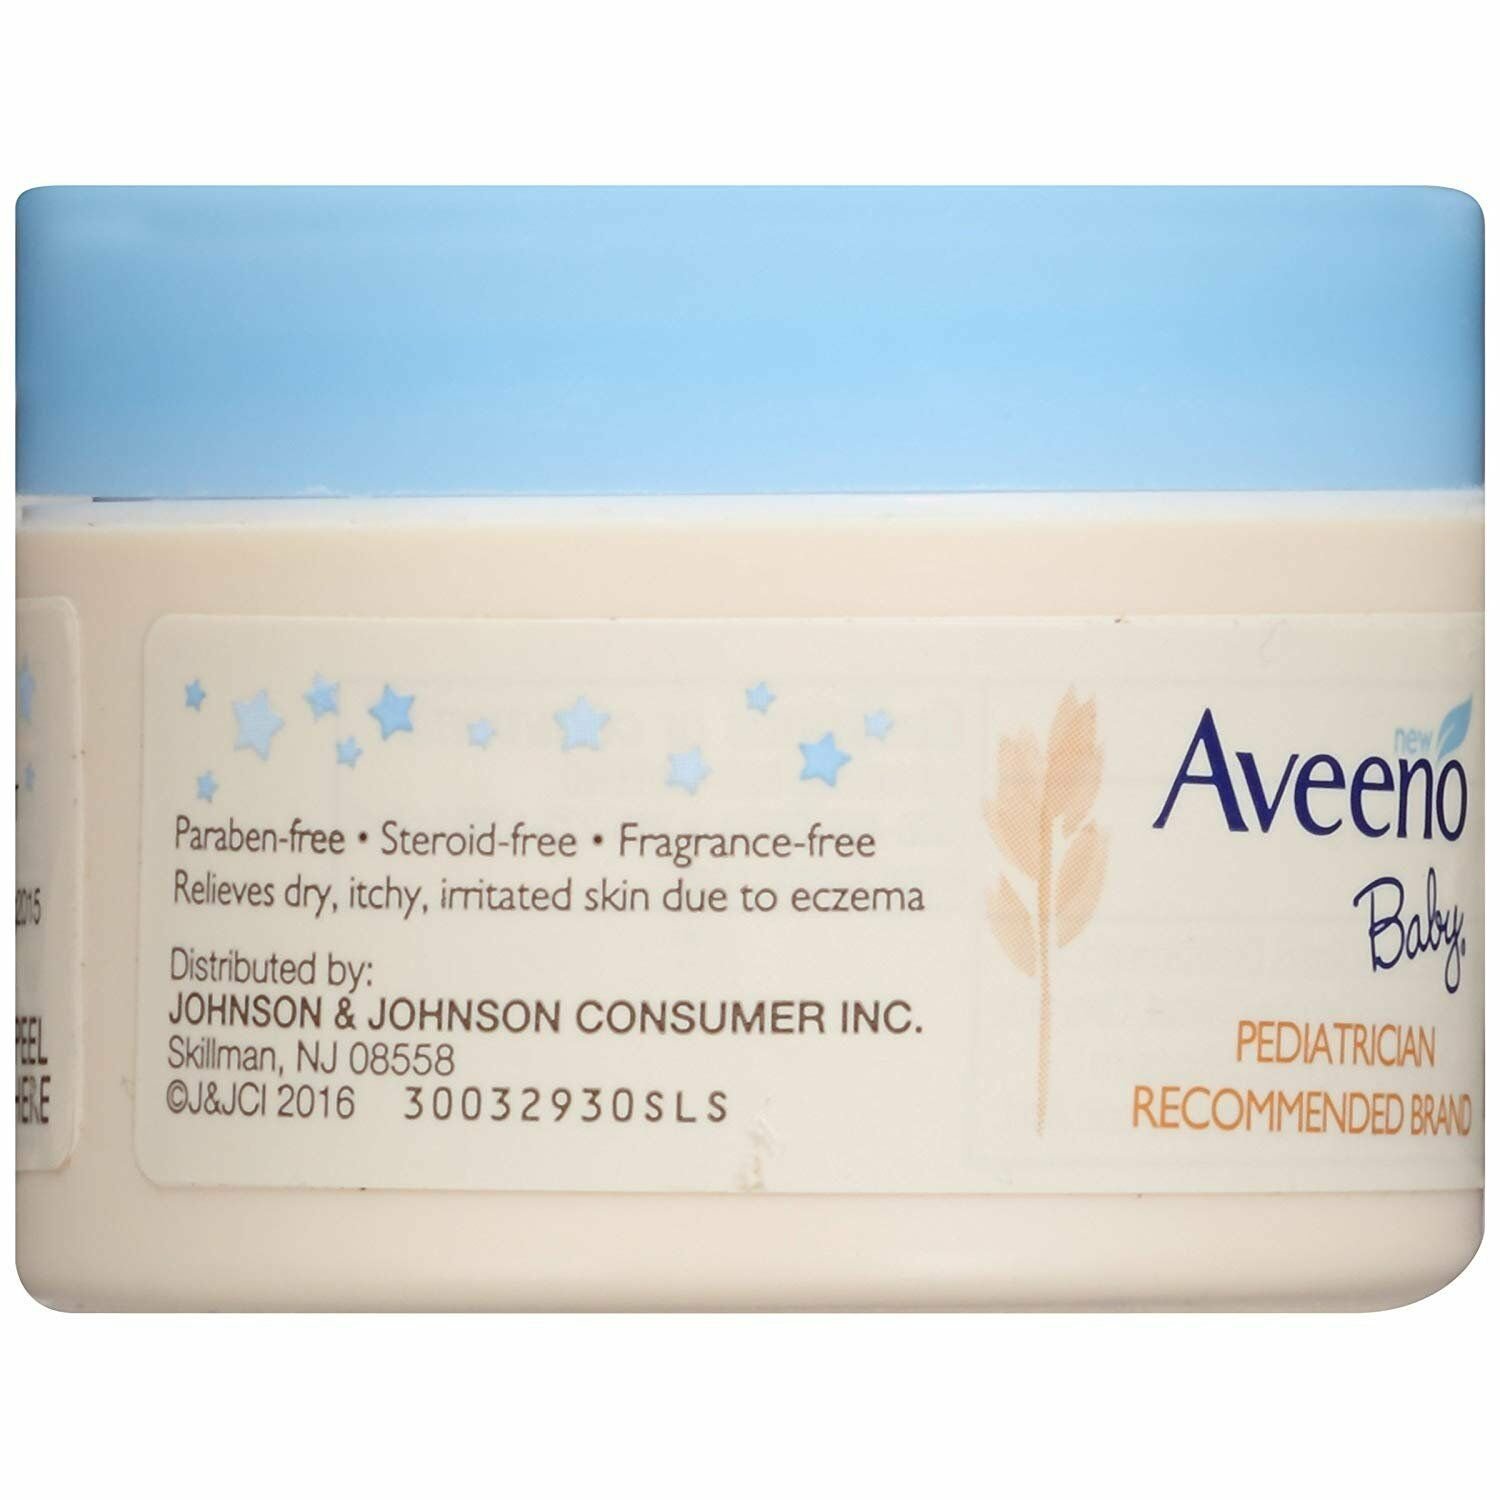 Aveeno Baby Eczema Therapy Nighttime Balm  1 Ounce  Pack of 2 - image 2 of 3